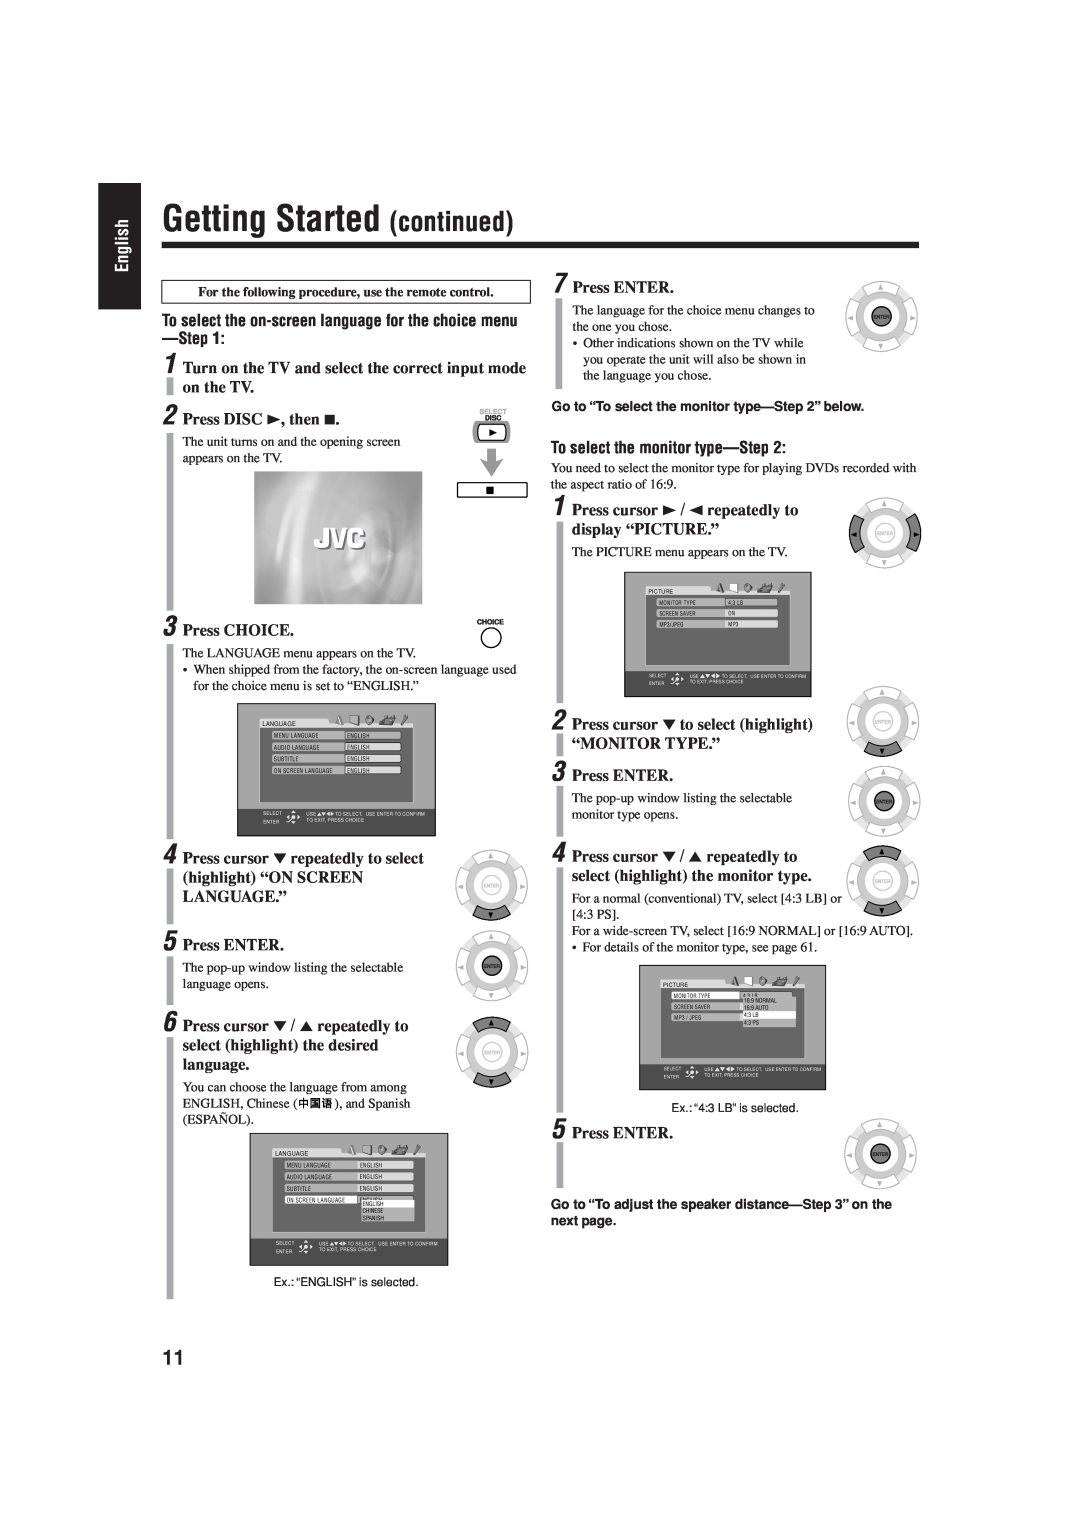 JVC CA-HXZ77D manual Press ENTER, Press DISC 3, then, Press CHOICE, To select the monitor type, Getting Started continued 